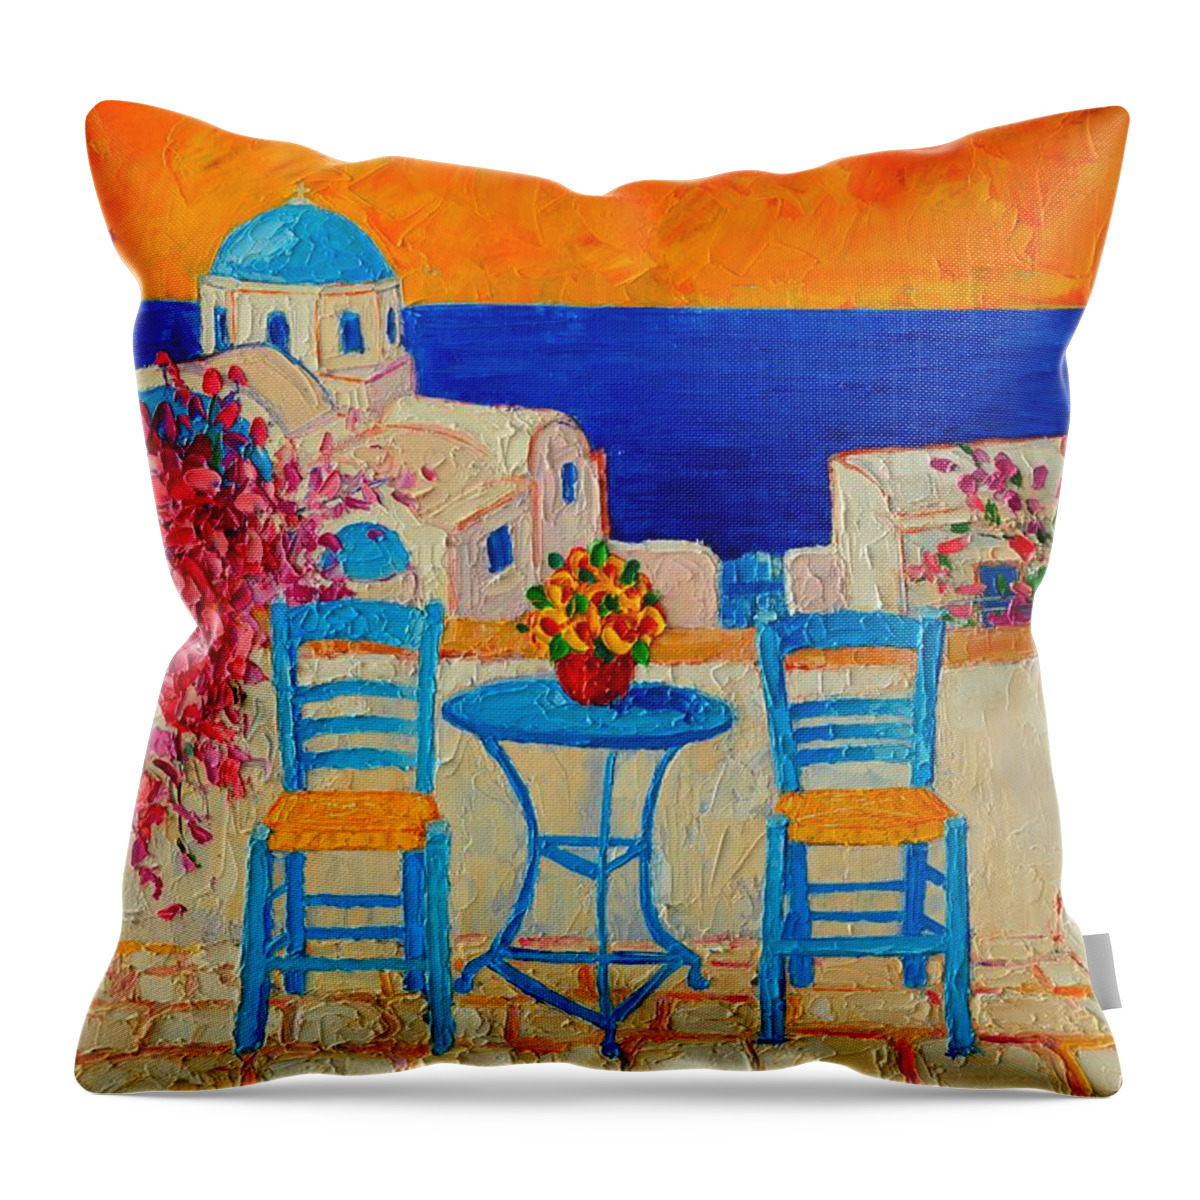 Greece Throw Pillow featuring the painting Table For Two In Santorini Greece by Ana Maria Edulescu